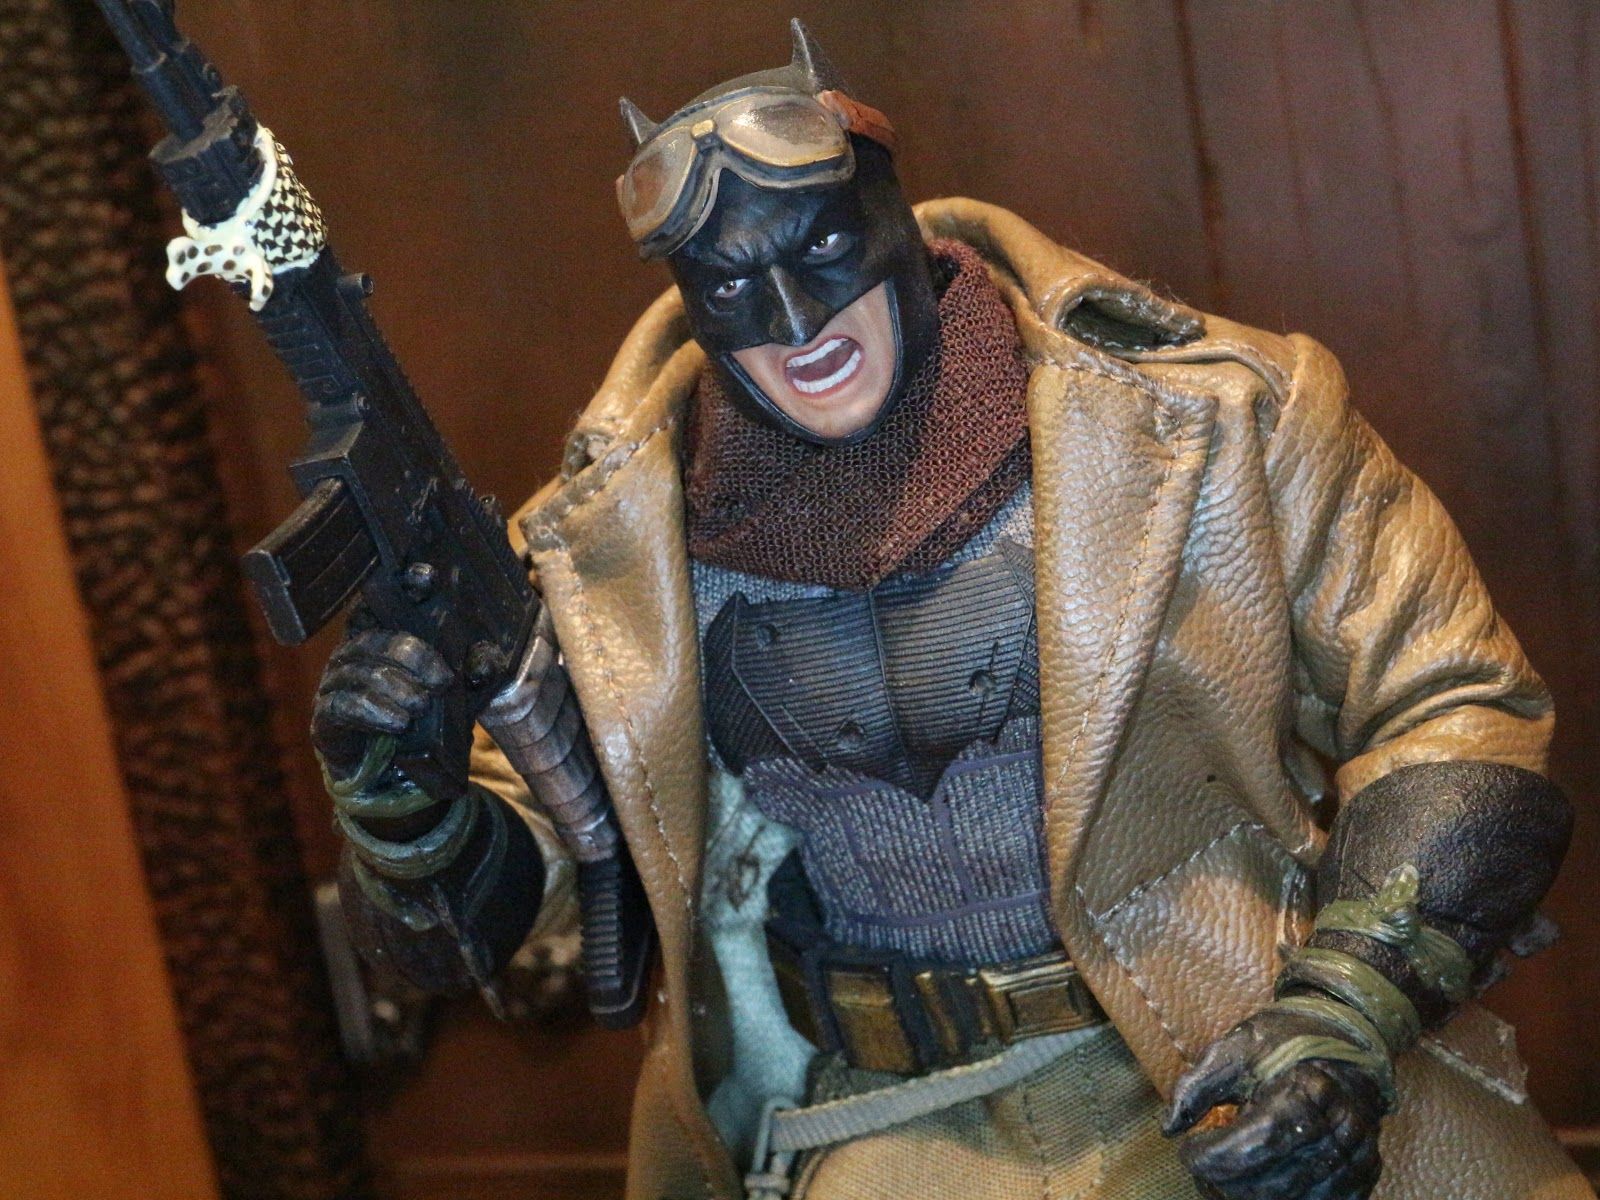 Action Figure Barbecue: Action Figure Review: Knightmare Batman from One:12 Collective: DC Universe